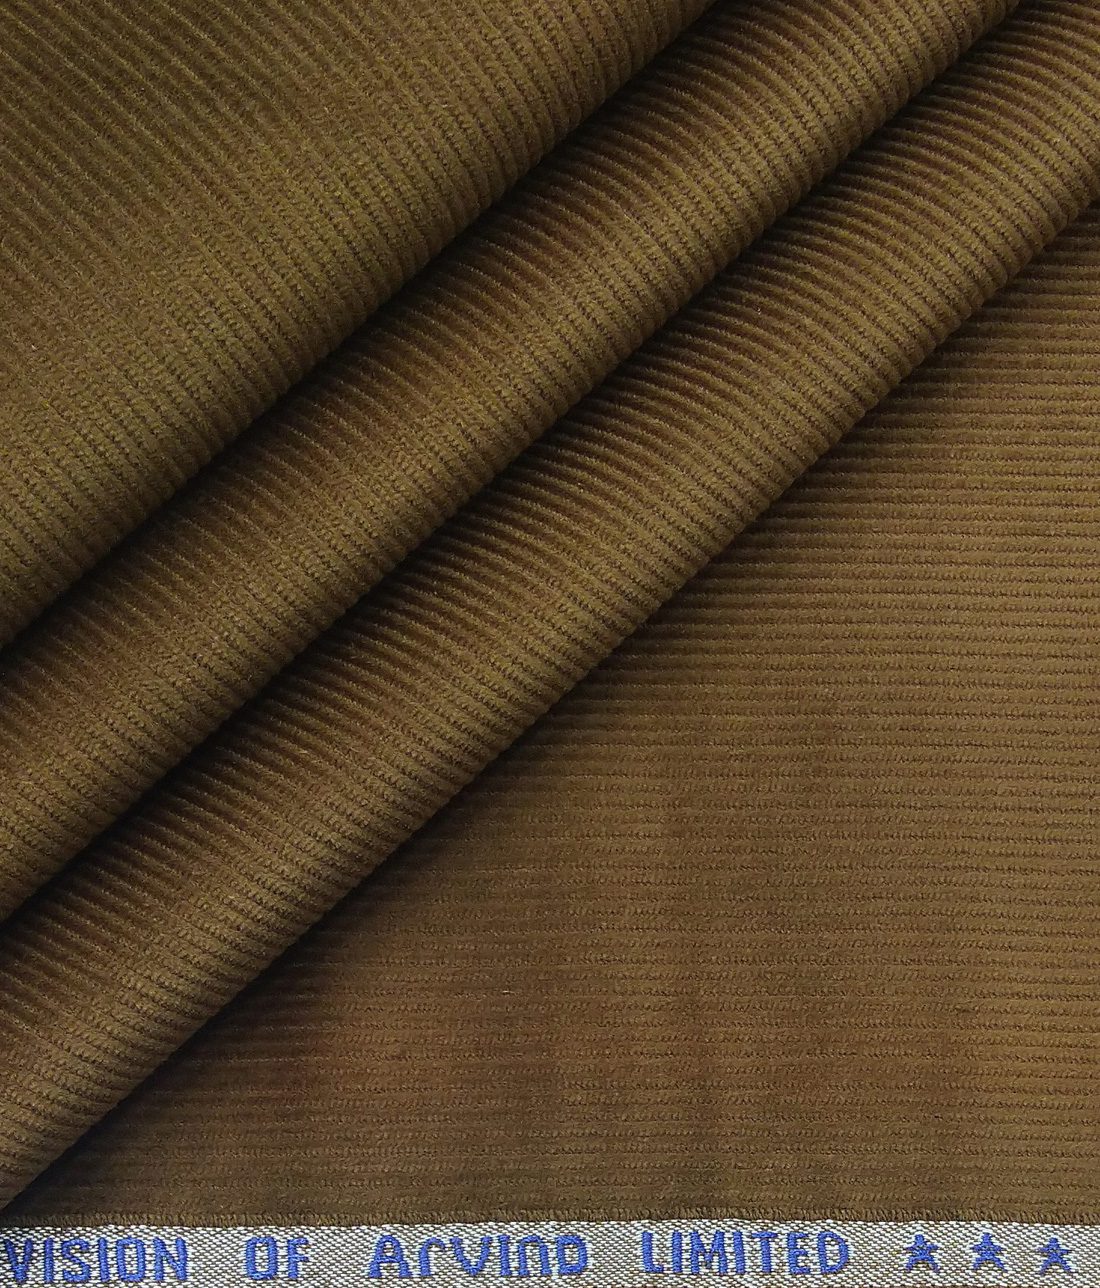 Bottle Green Corduroy Fabric | Green Cotton Cord Material